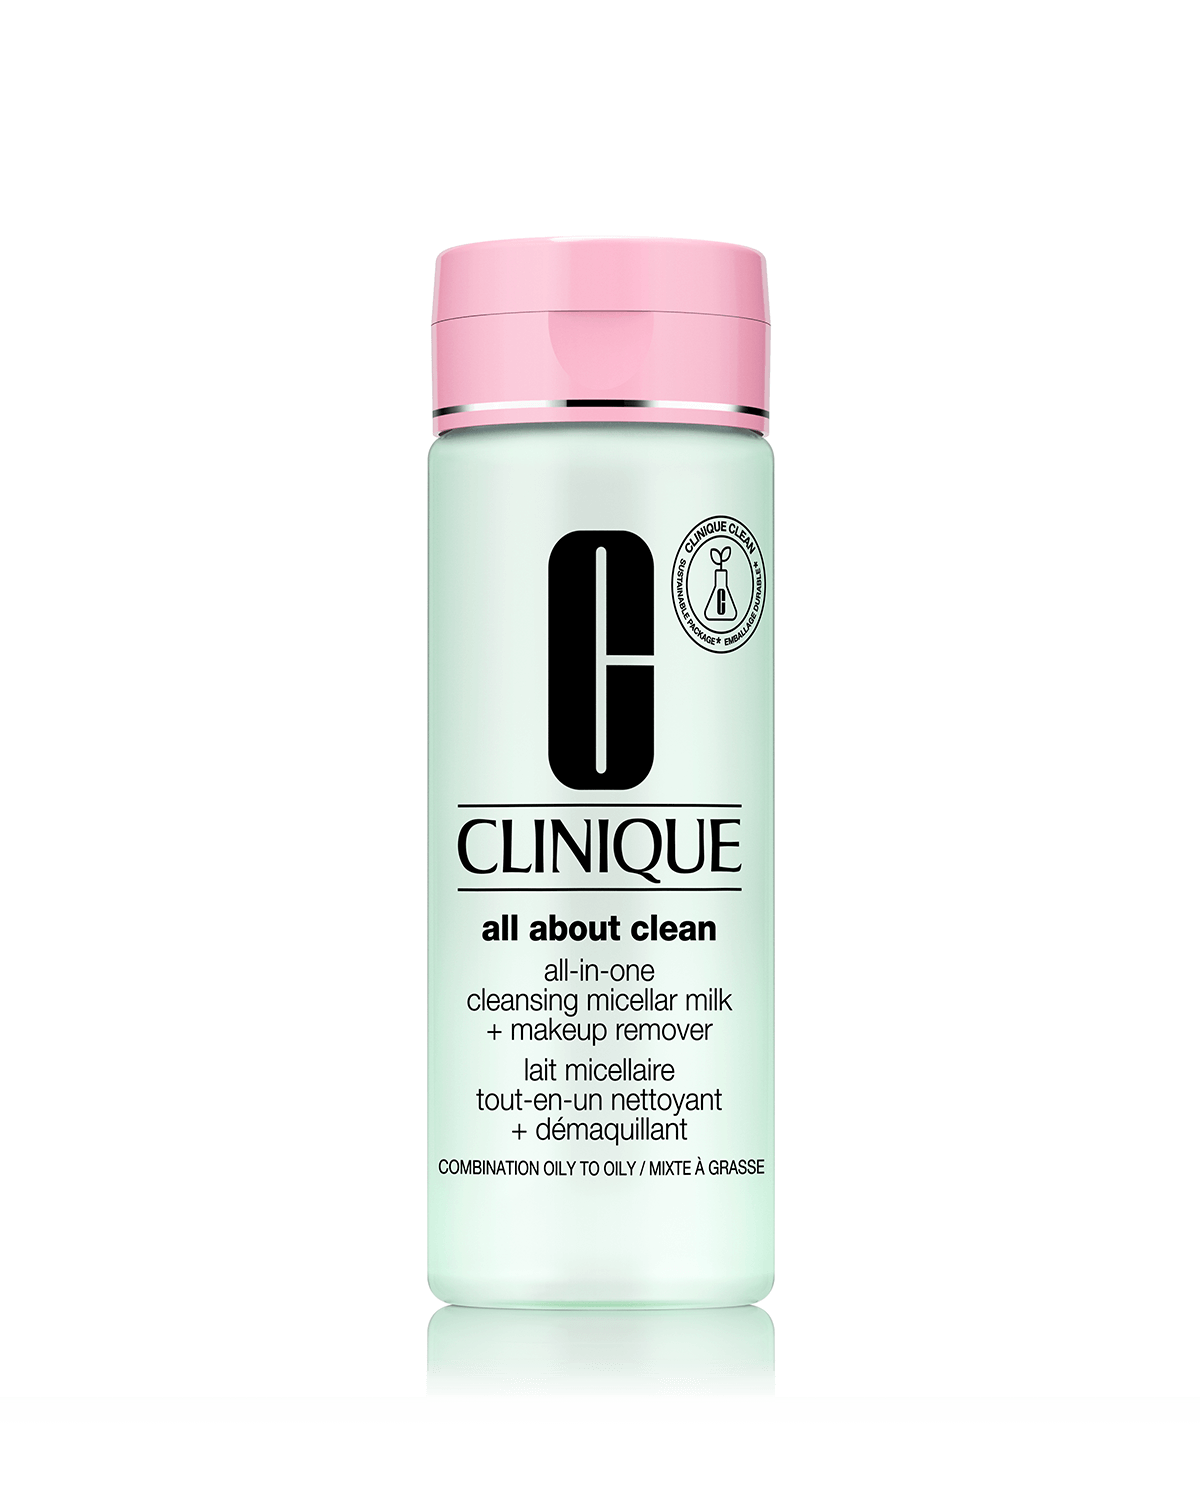 All About Clean All-in-One Cleansing Micellar Milk + Makeup Remover <Skin Type 1 and 2>